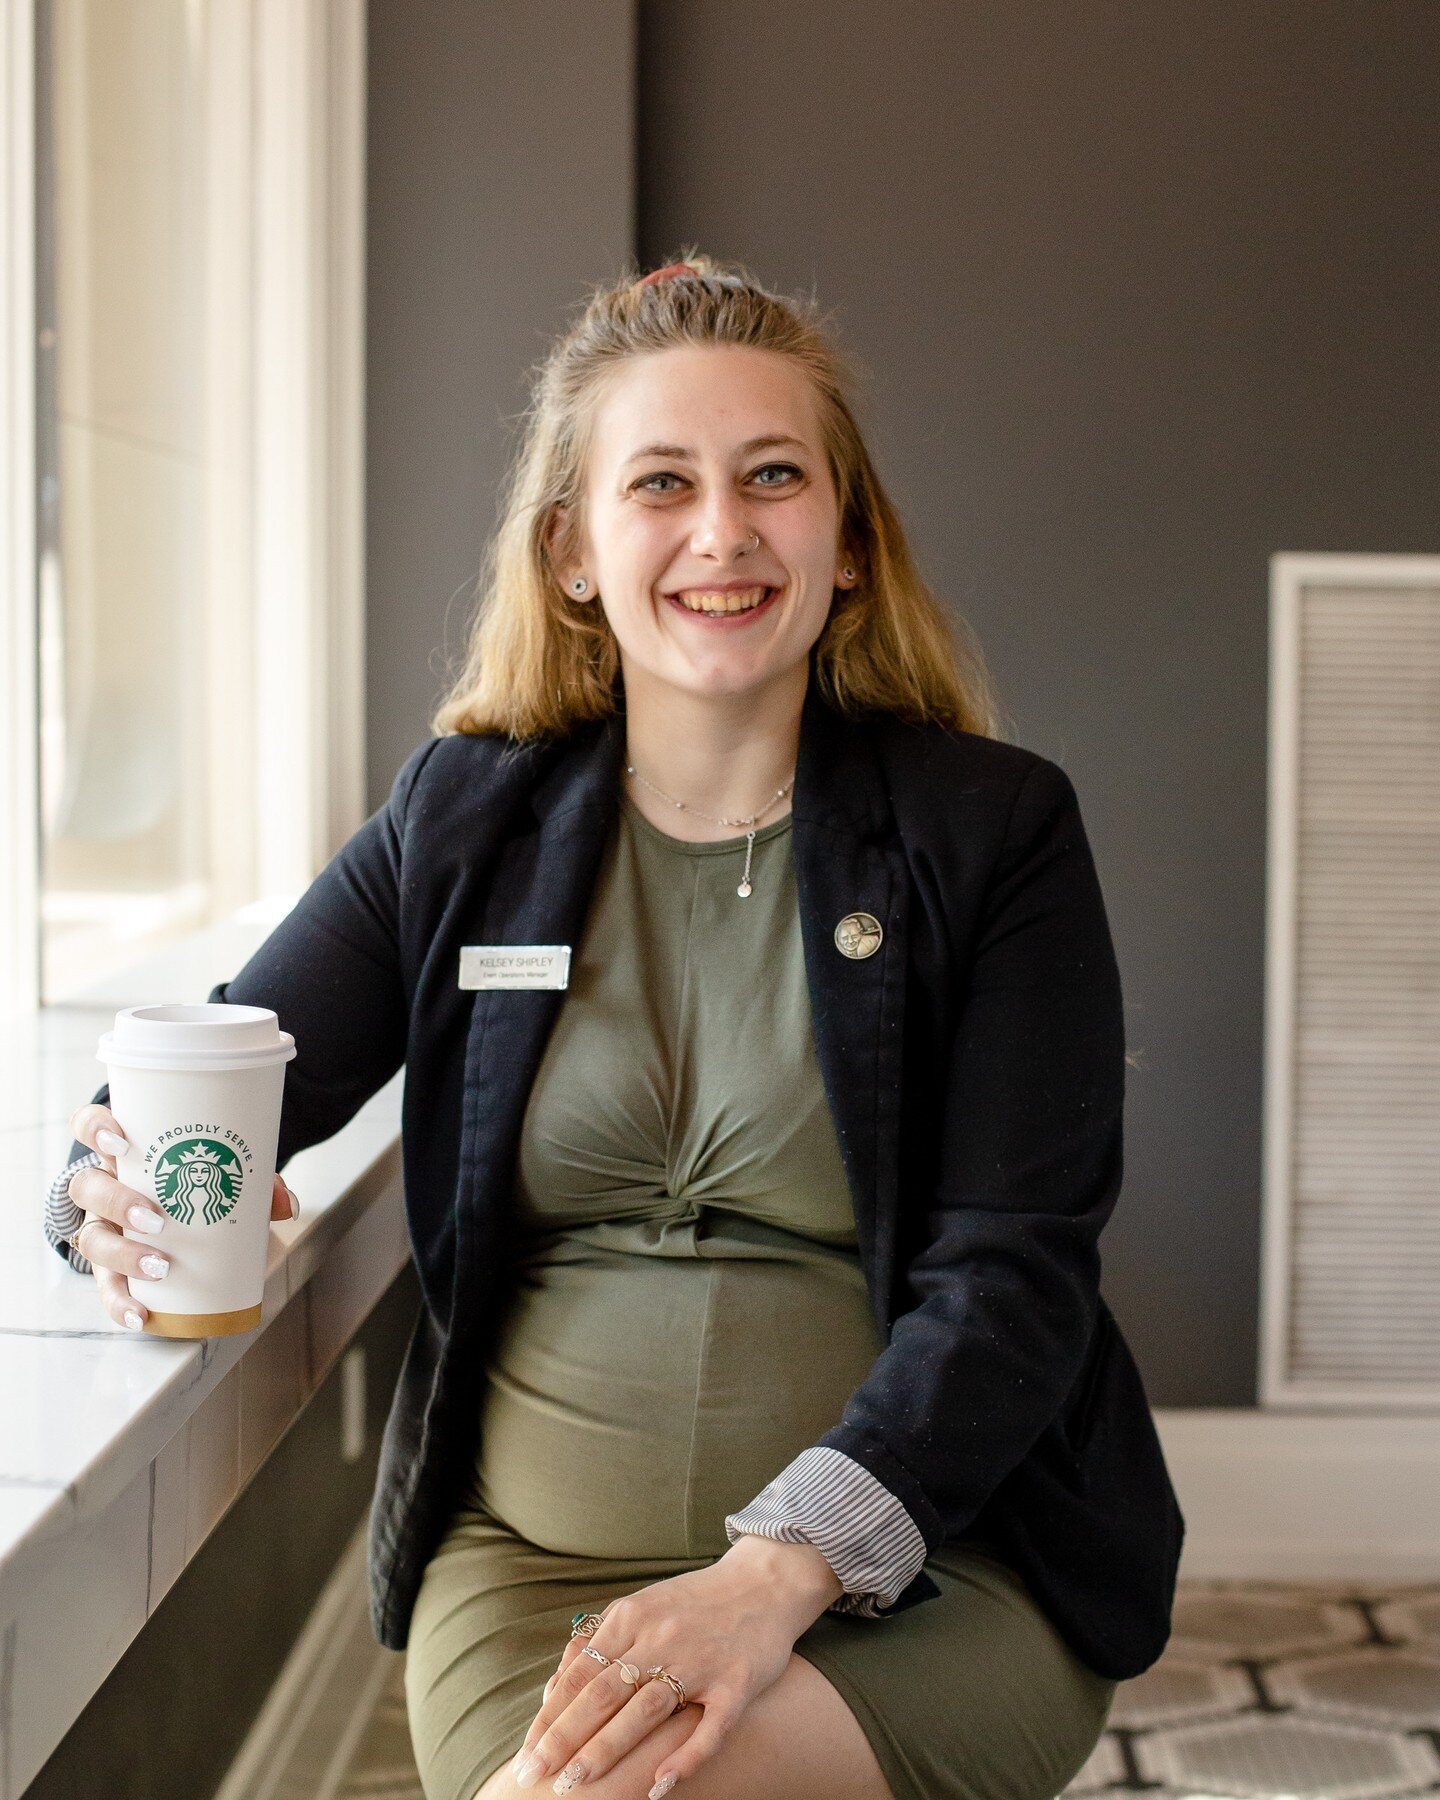 When Kelsey joined our team at The Virginian three years ago, she had no idea the bright future that awaited her here. Beginning as a Banquet Captain on our events team, she was trusted with more and more responsibility, eventually becoming our Marig